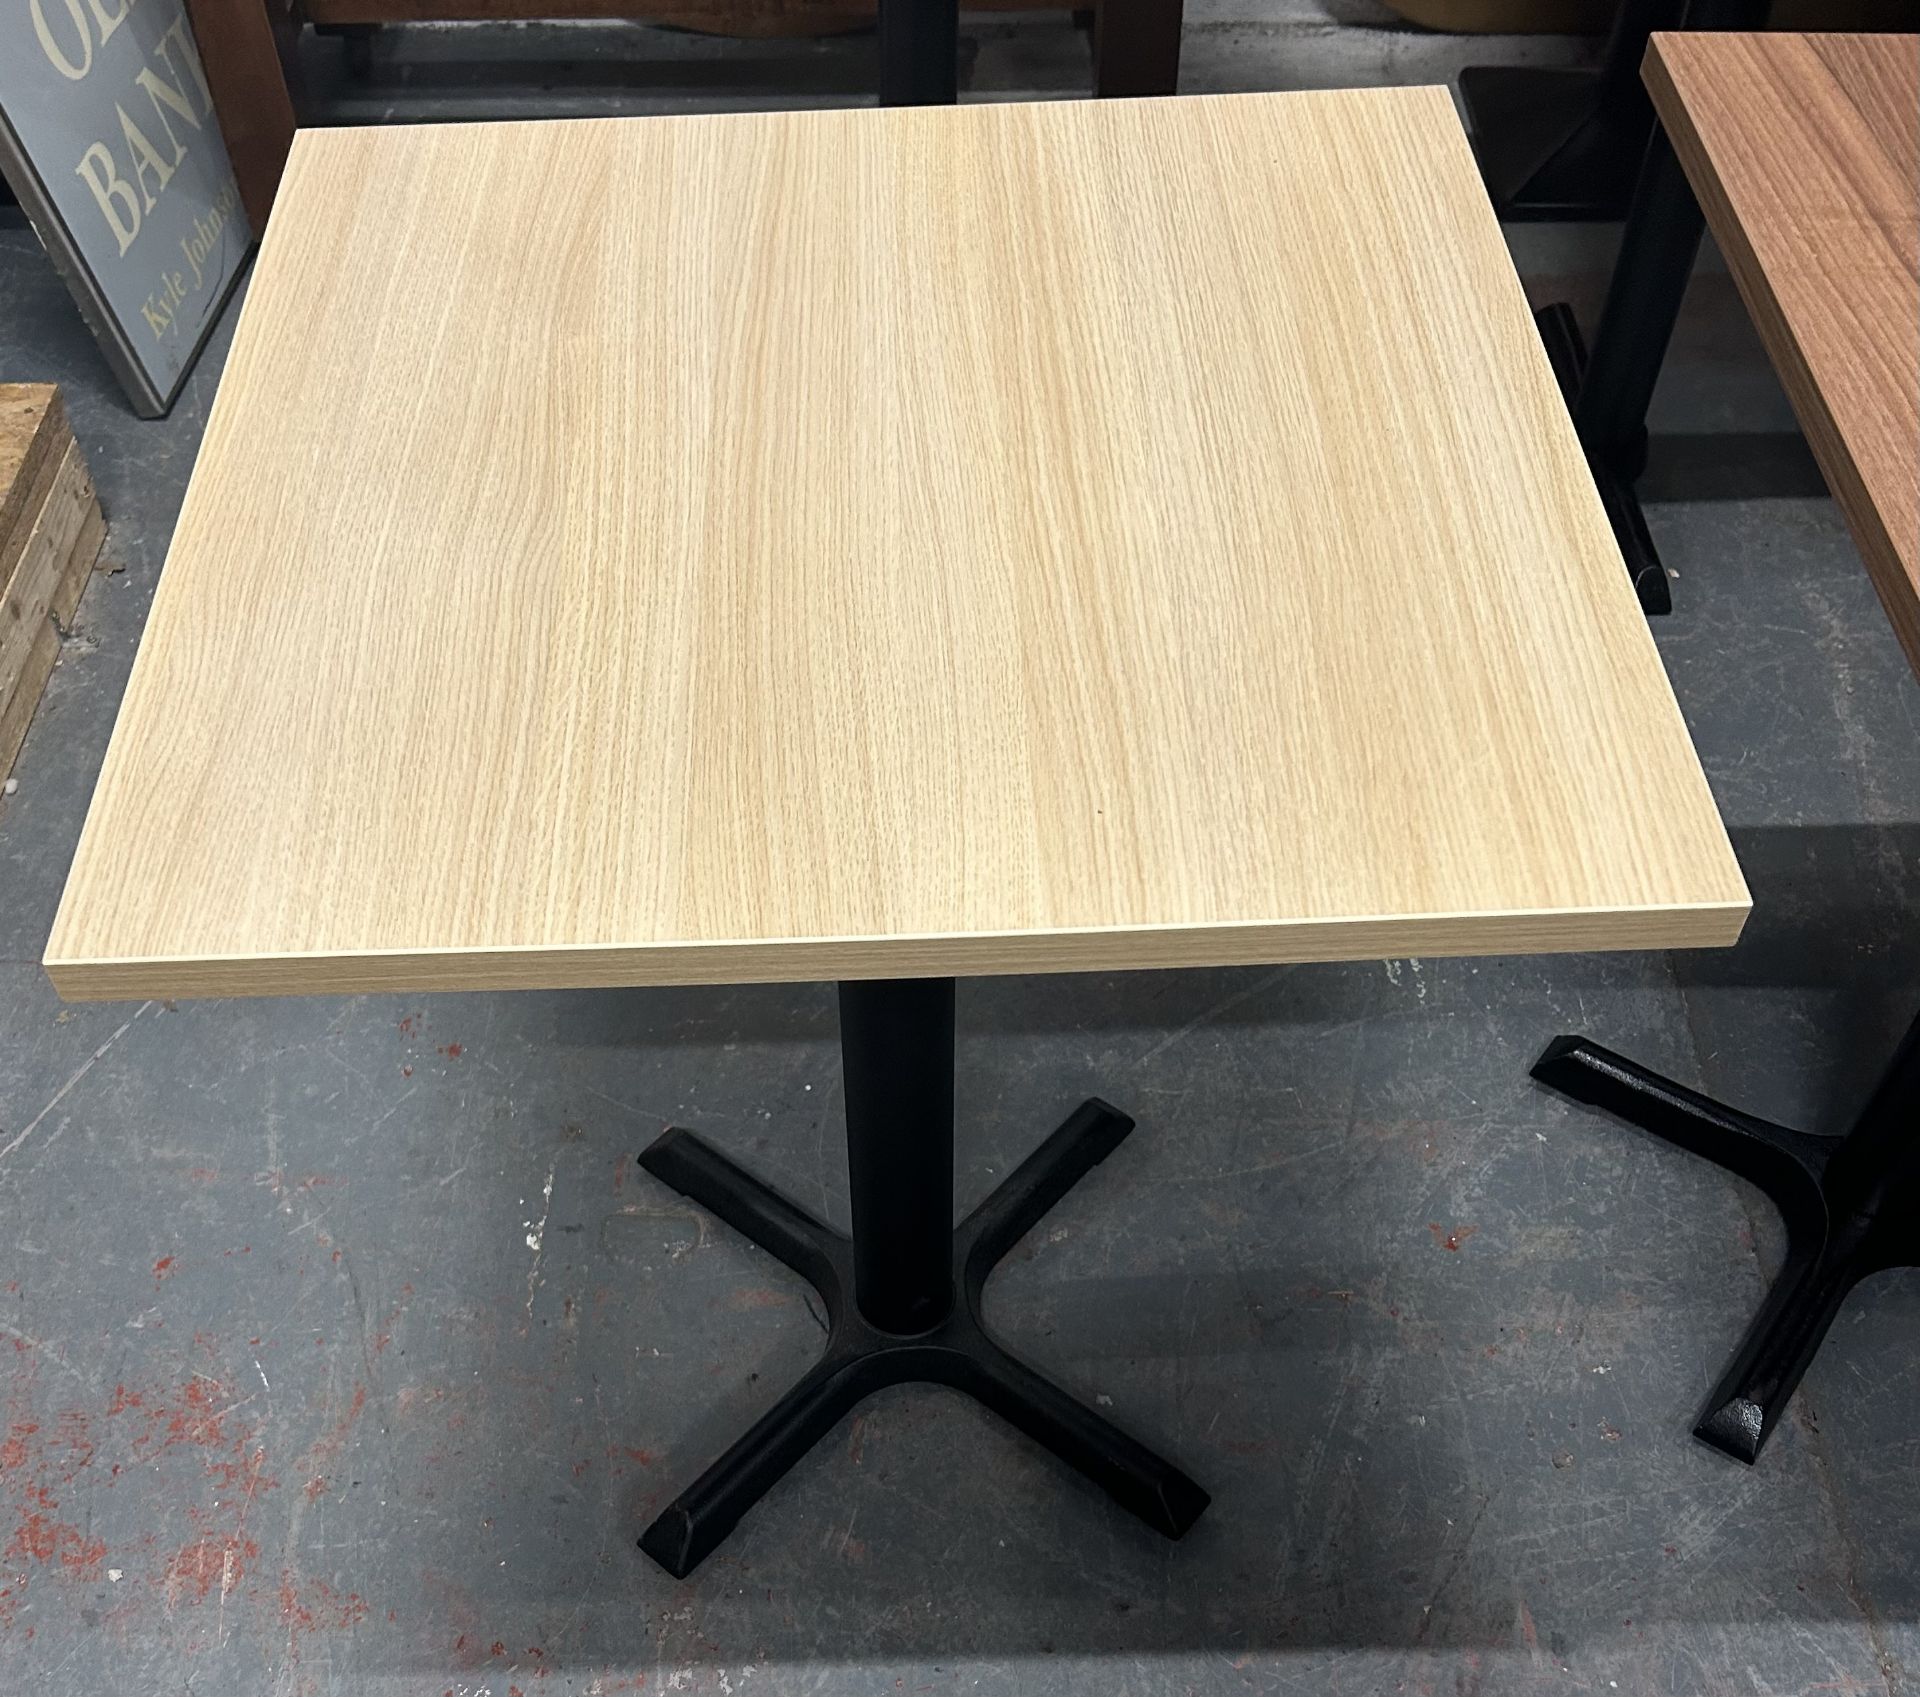 4 X BRAND NEW RESTAURANT/BAR COMPLETE TABLES OAK STYLE EFFECT